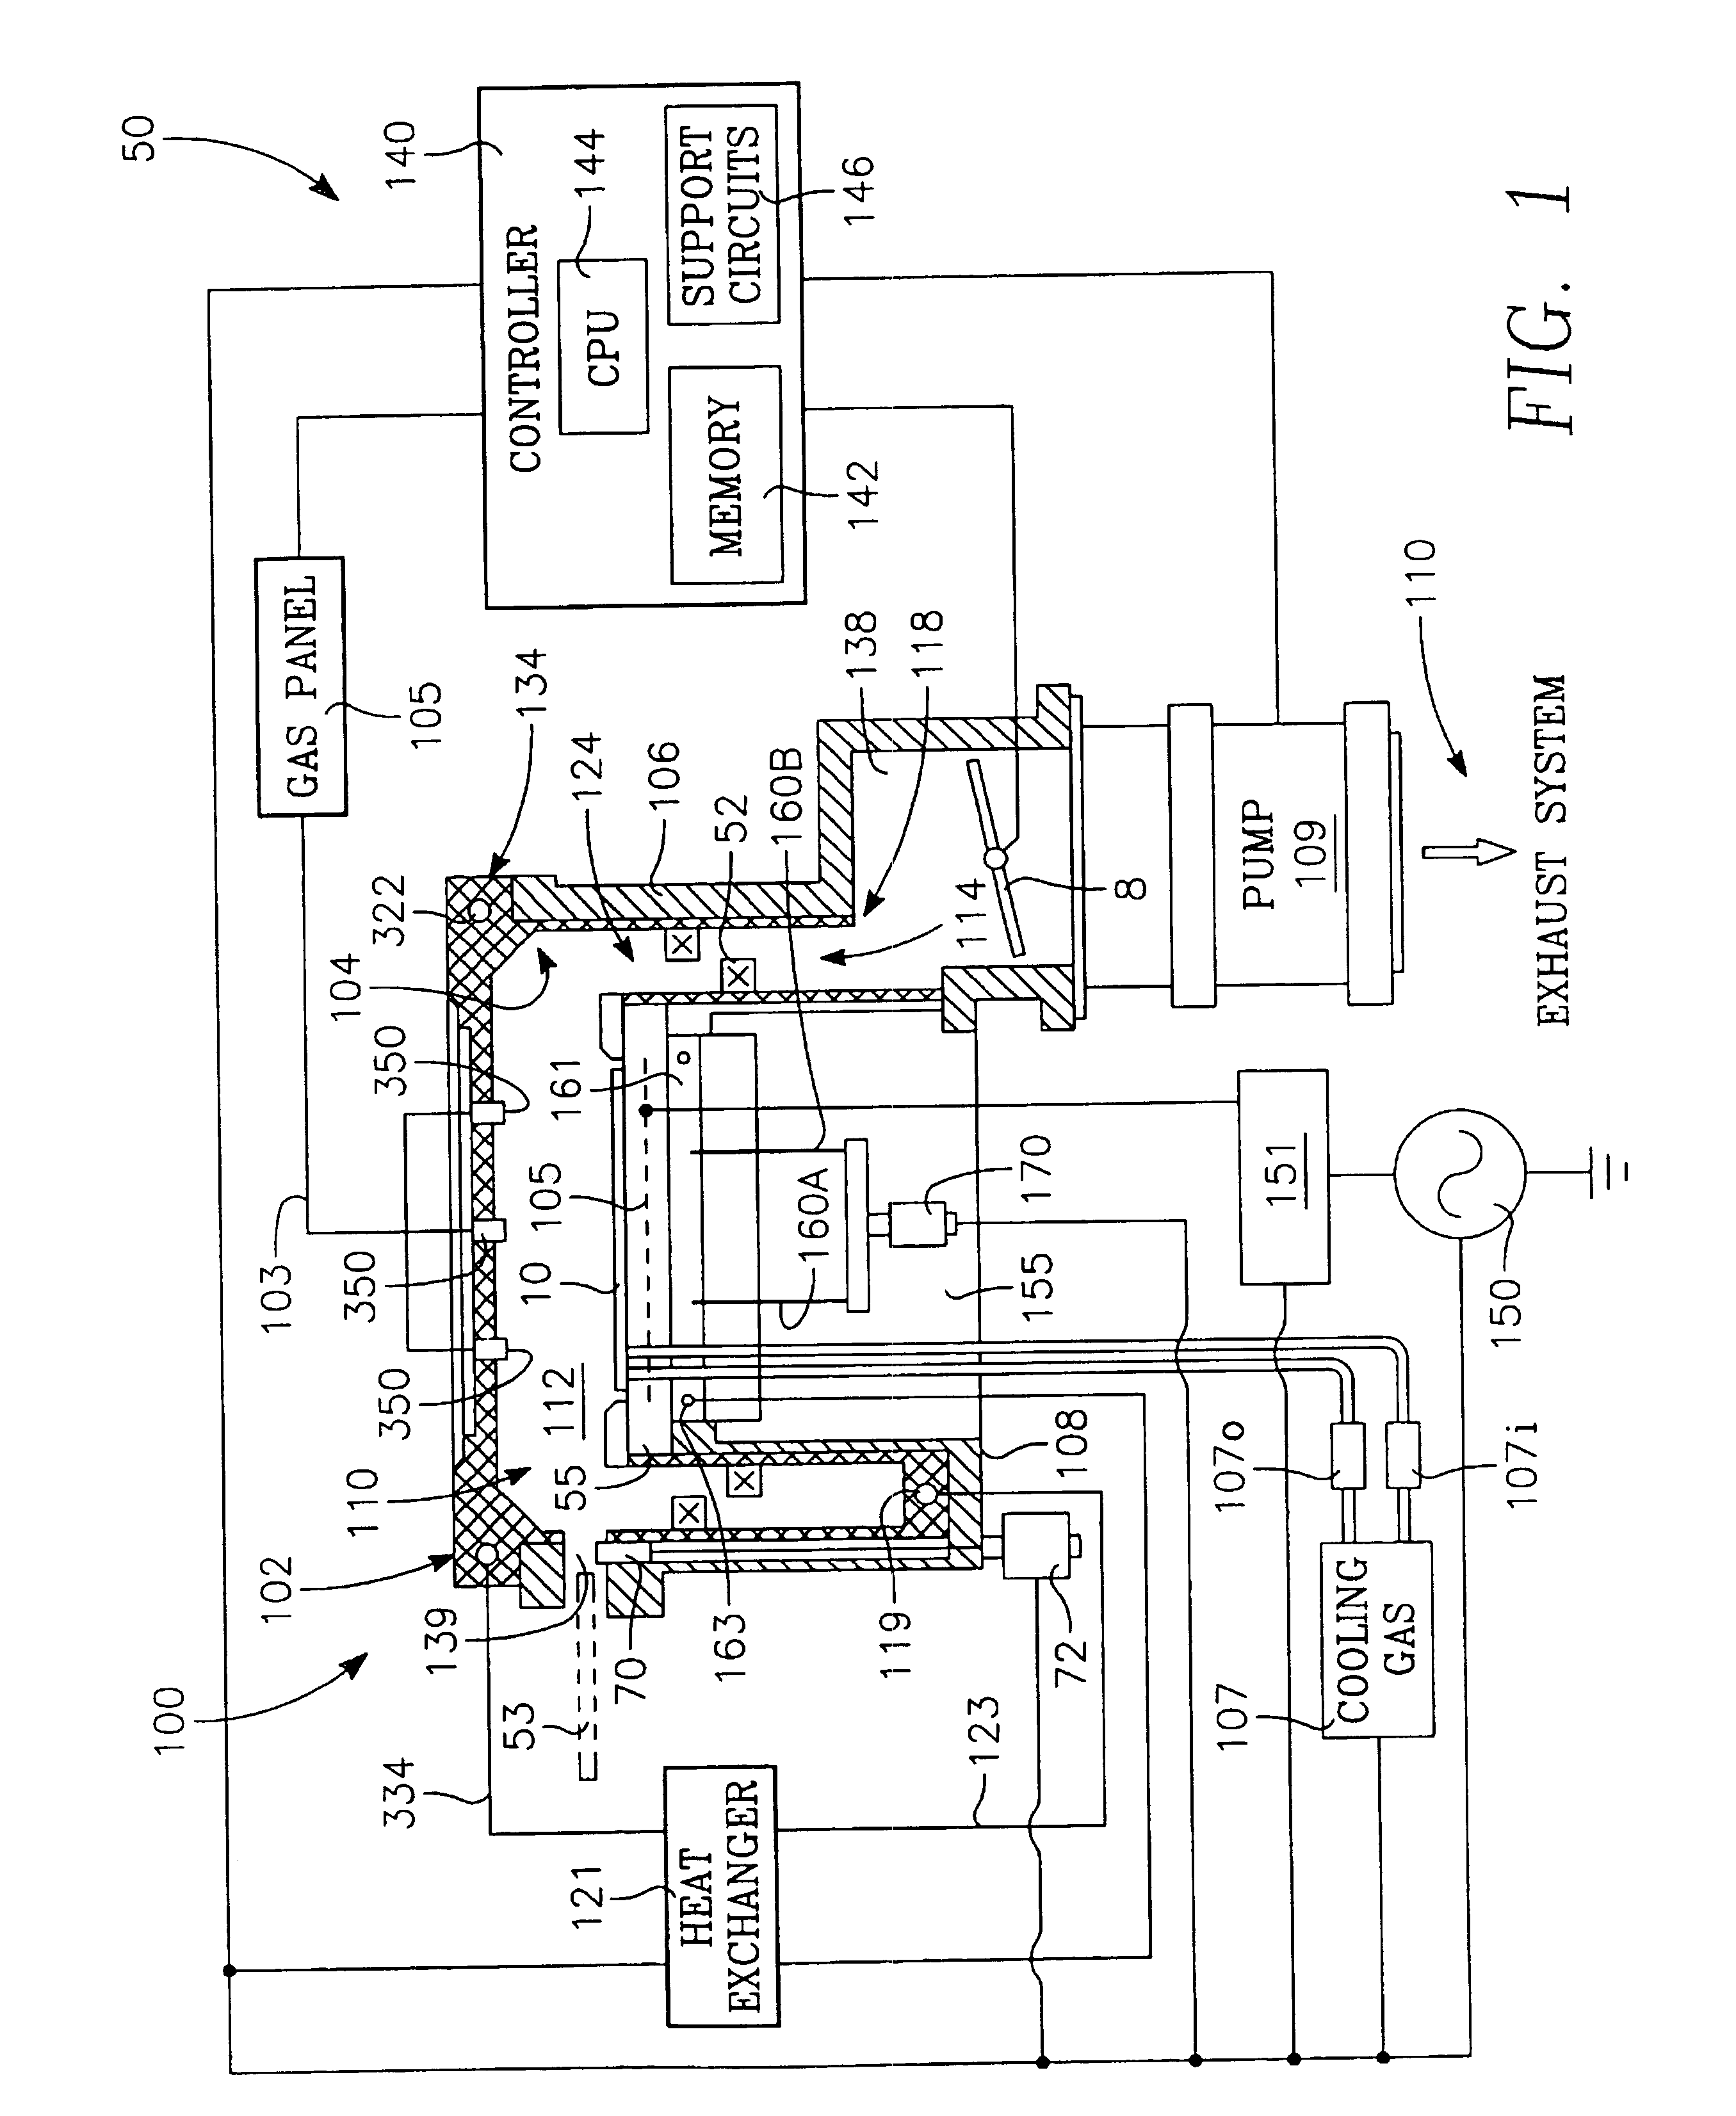 Dielectric etch chamber with expanded process window